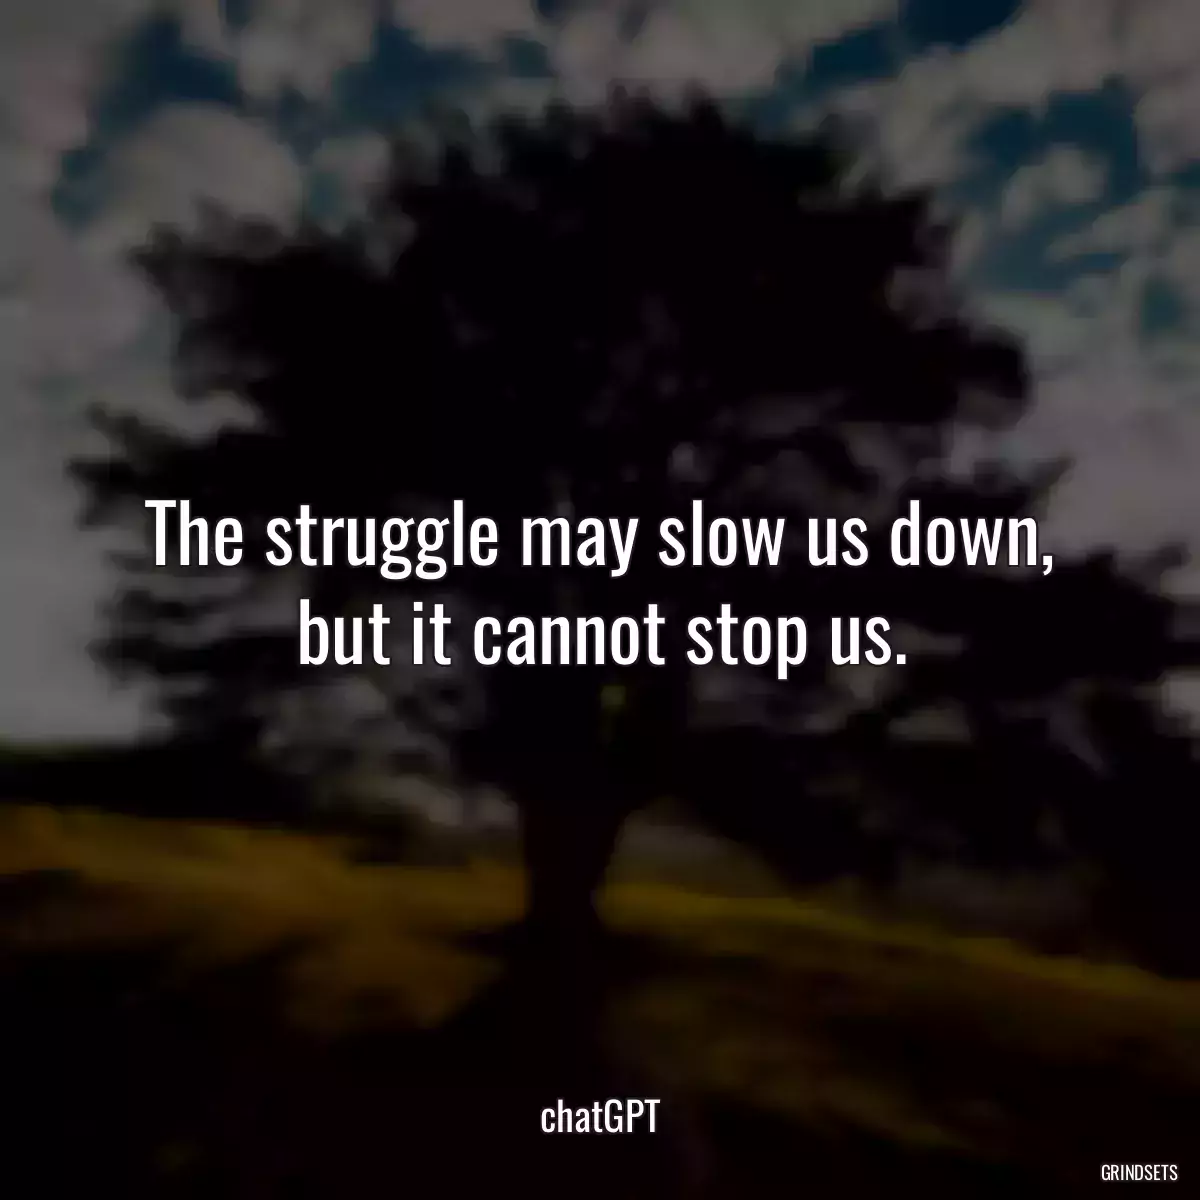 The struggle may slow us down, but it cannot stop us.